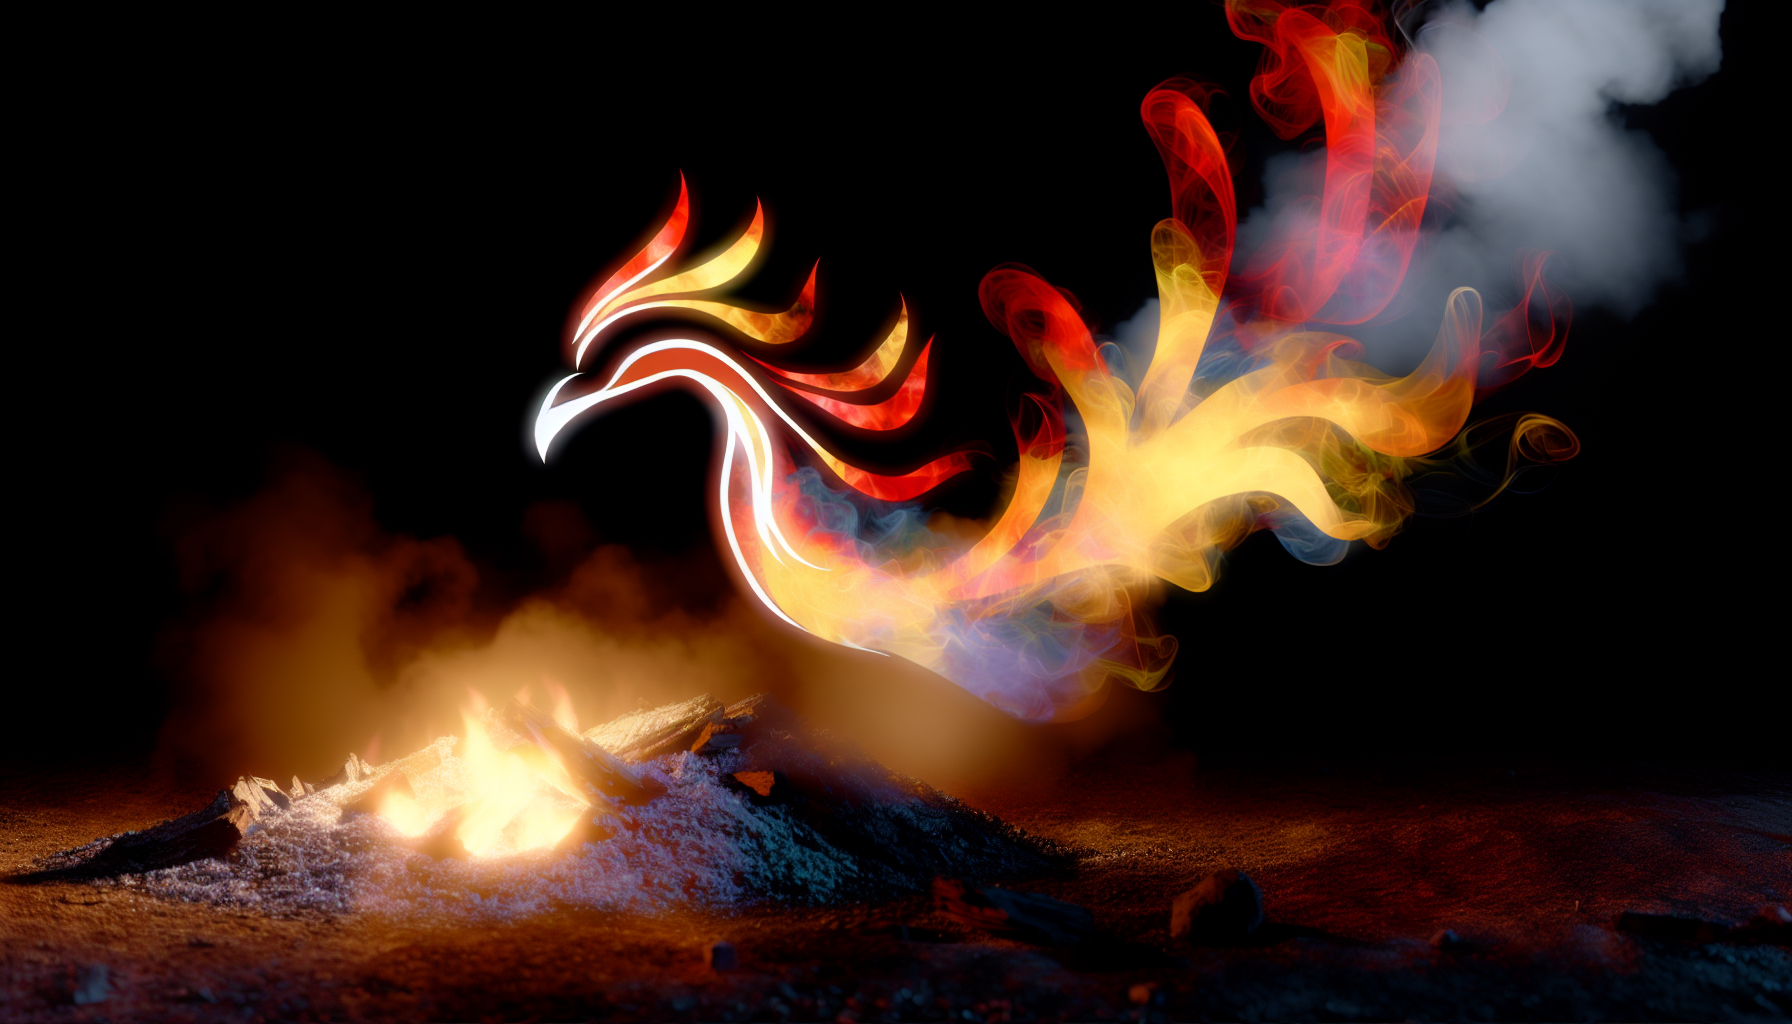 A stylized phoenix rising from ashes, symbolizing resilience and change